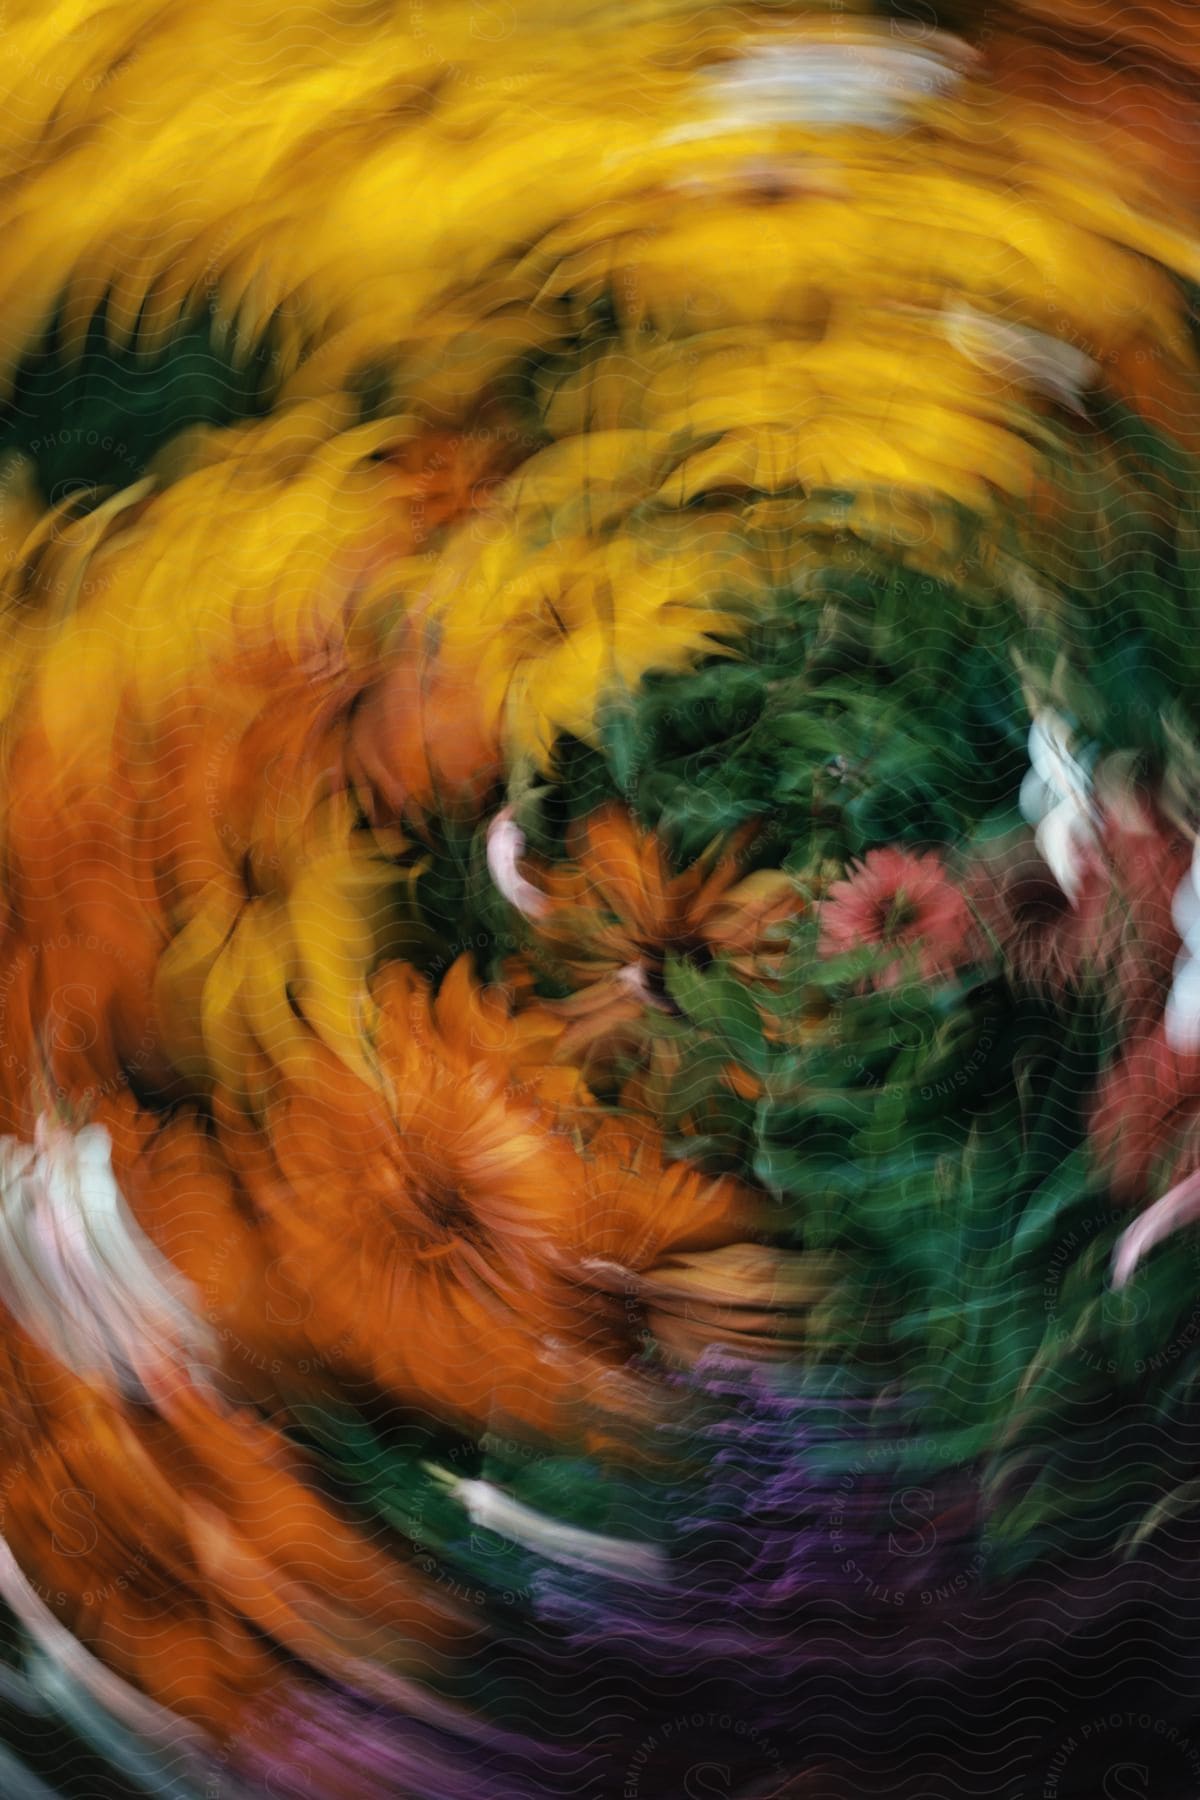 Abstract flower arrangement with vibrant colors distorted by motion blur